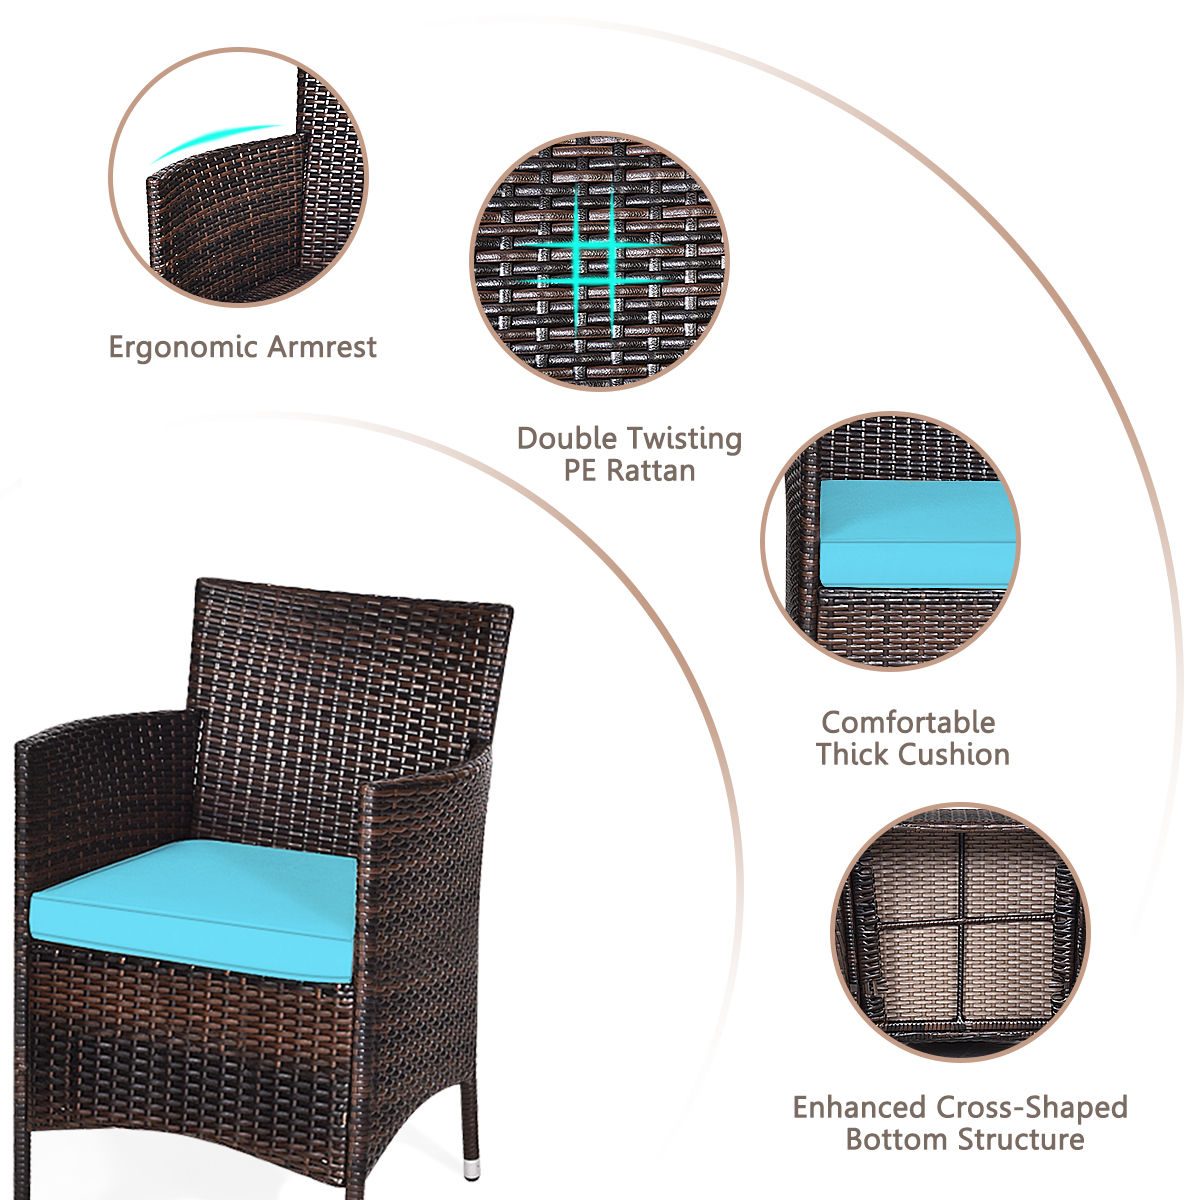 Costway Outdoor 3 PCS Rattan Wicker Furniture Sets Chairs Coffee Table Garden Blue - image 3 of 10